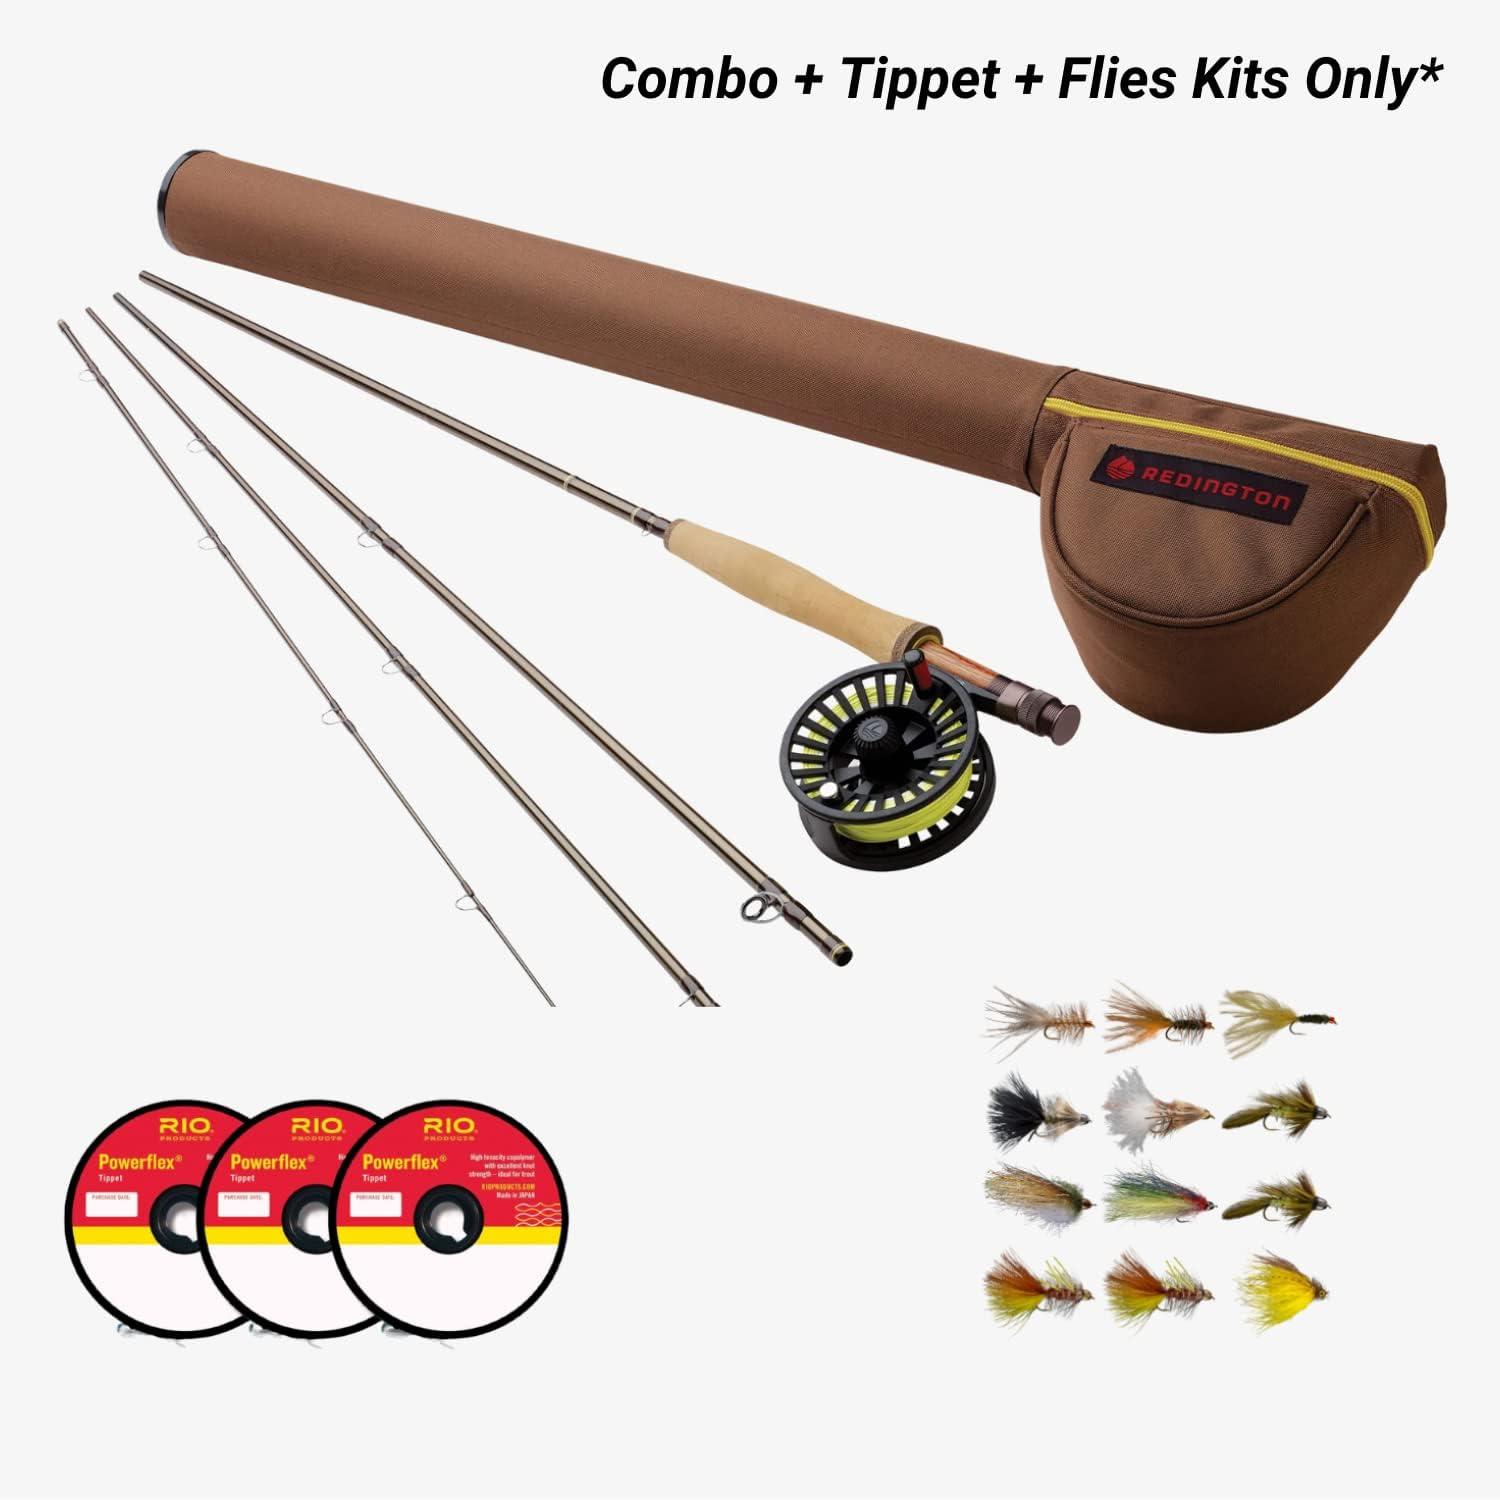 Redington Path Fly Rod Combo Kit with Pre-Spooled Crosswater Reel,  Medium-Fast A